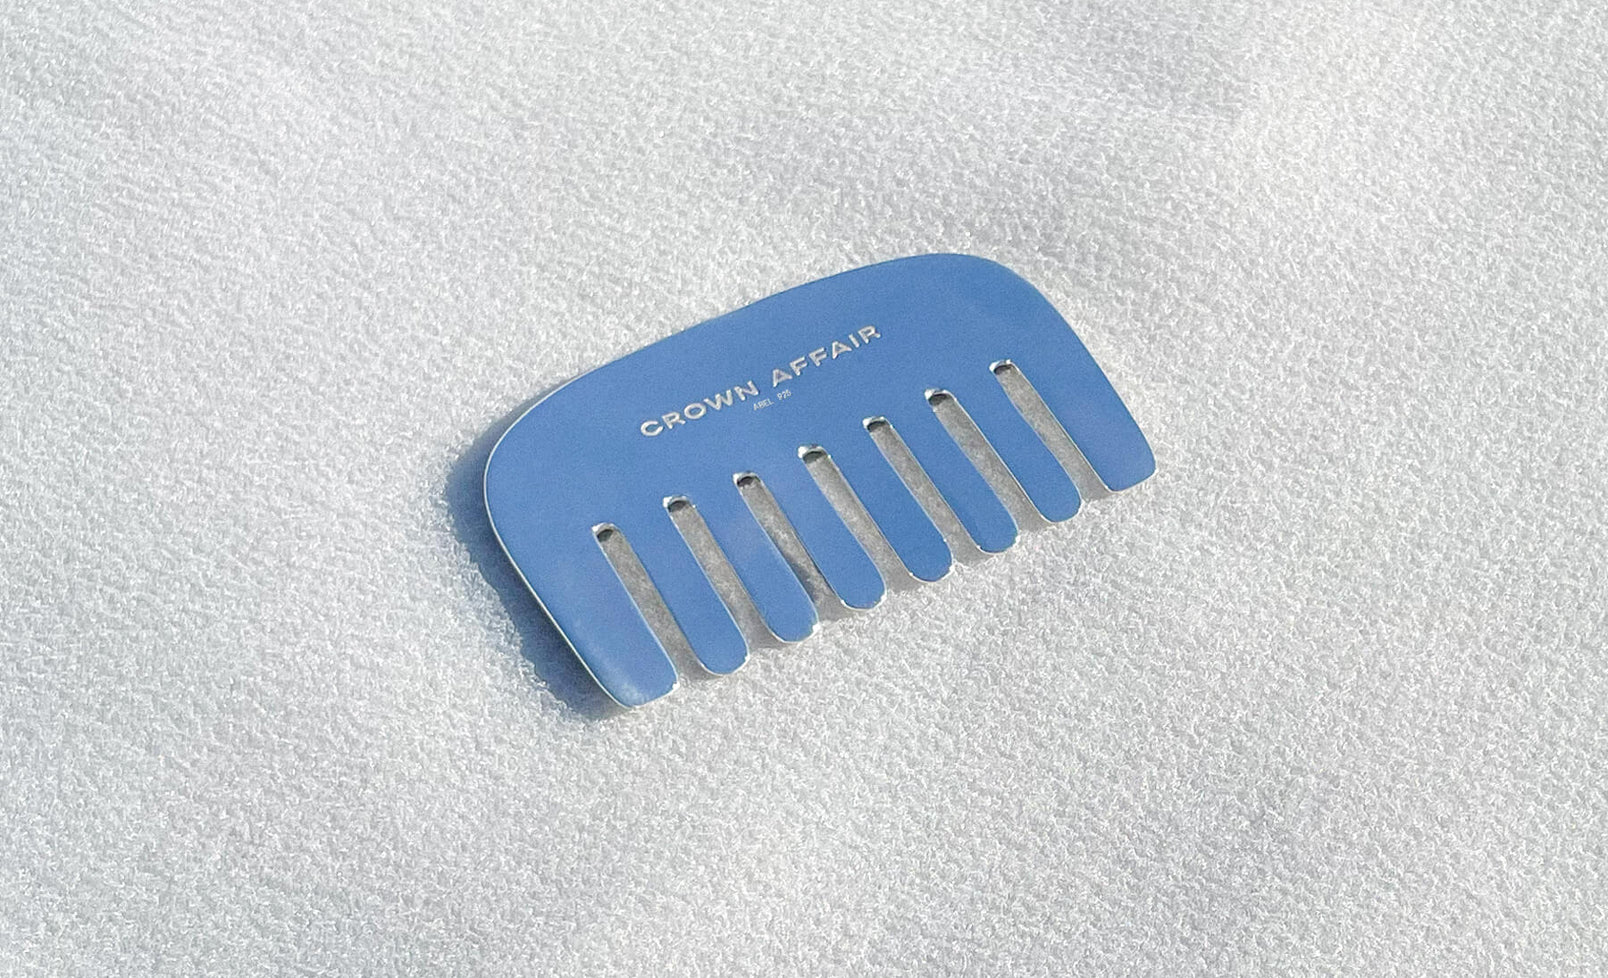 Crown Affair x Abel Objects: The Comb No. 001